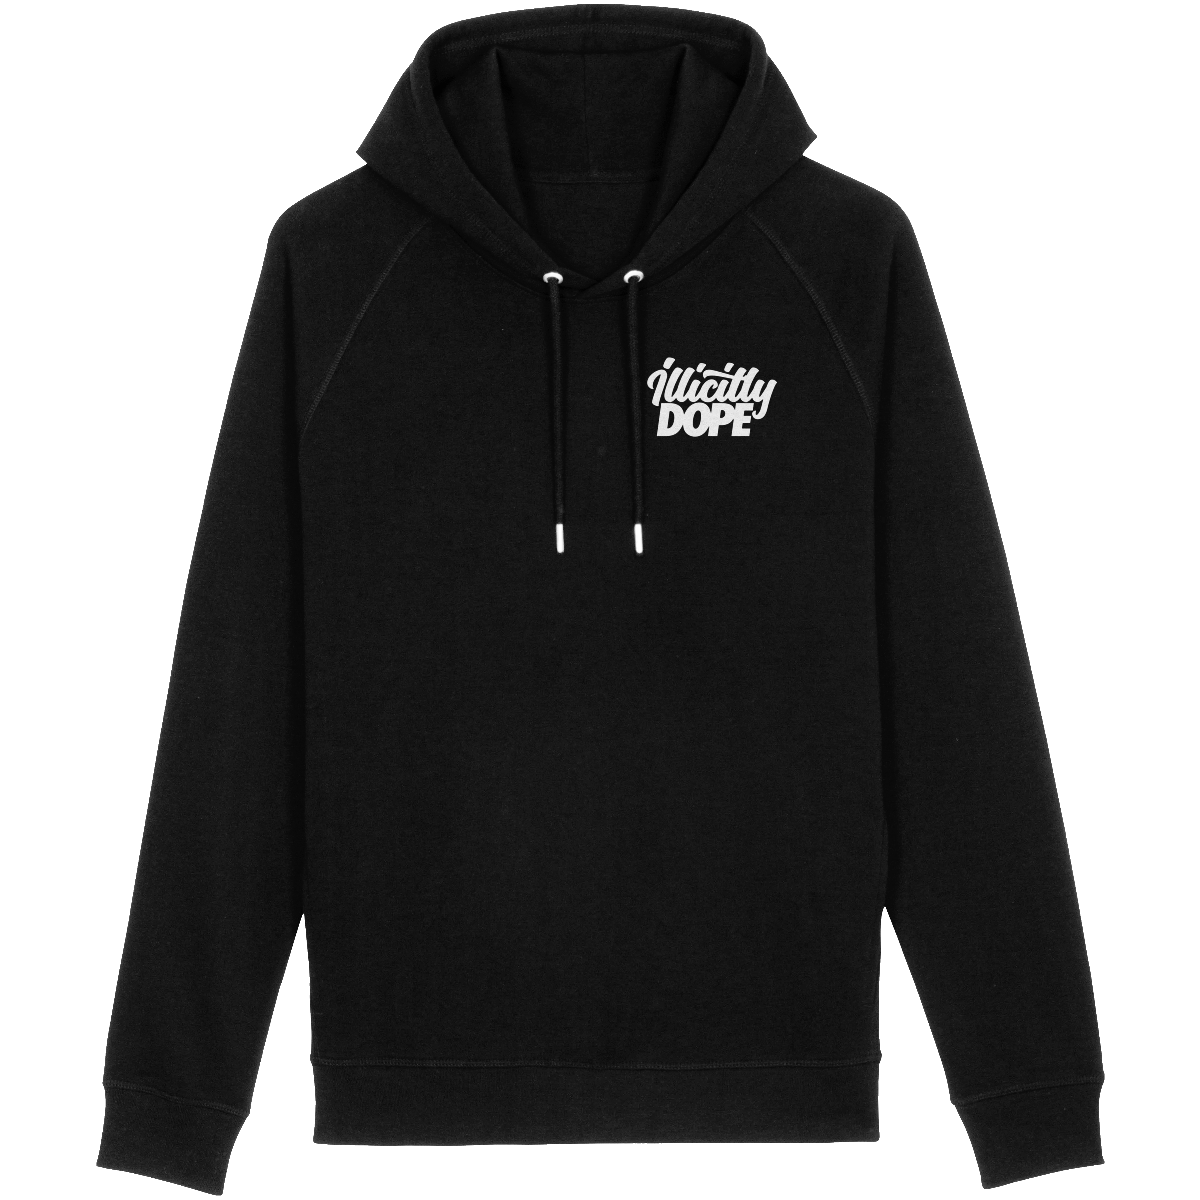 Reasonable Doubt - Fitted Hoody